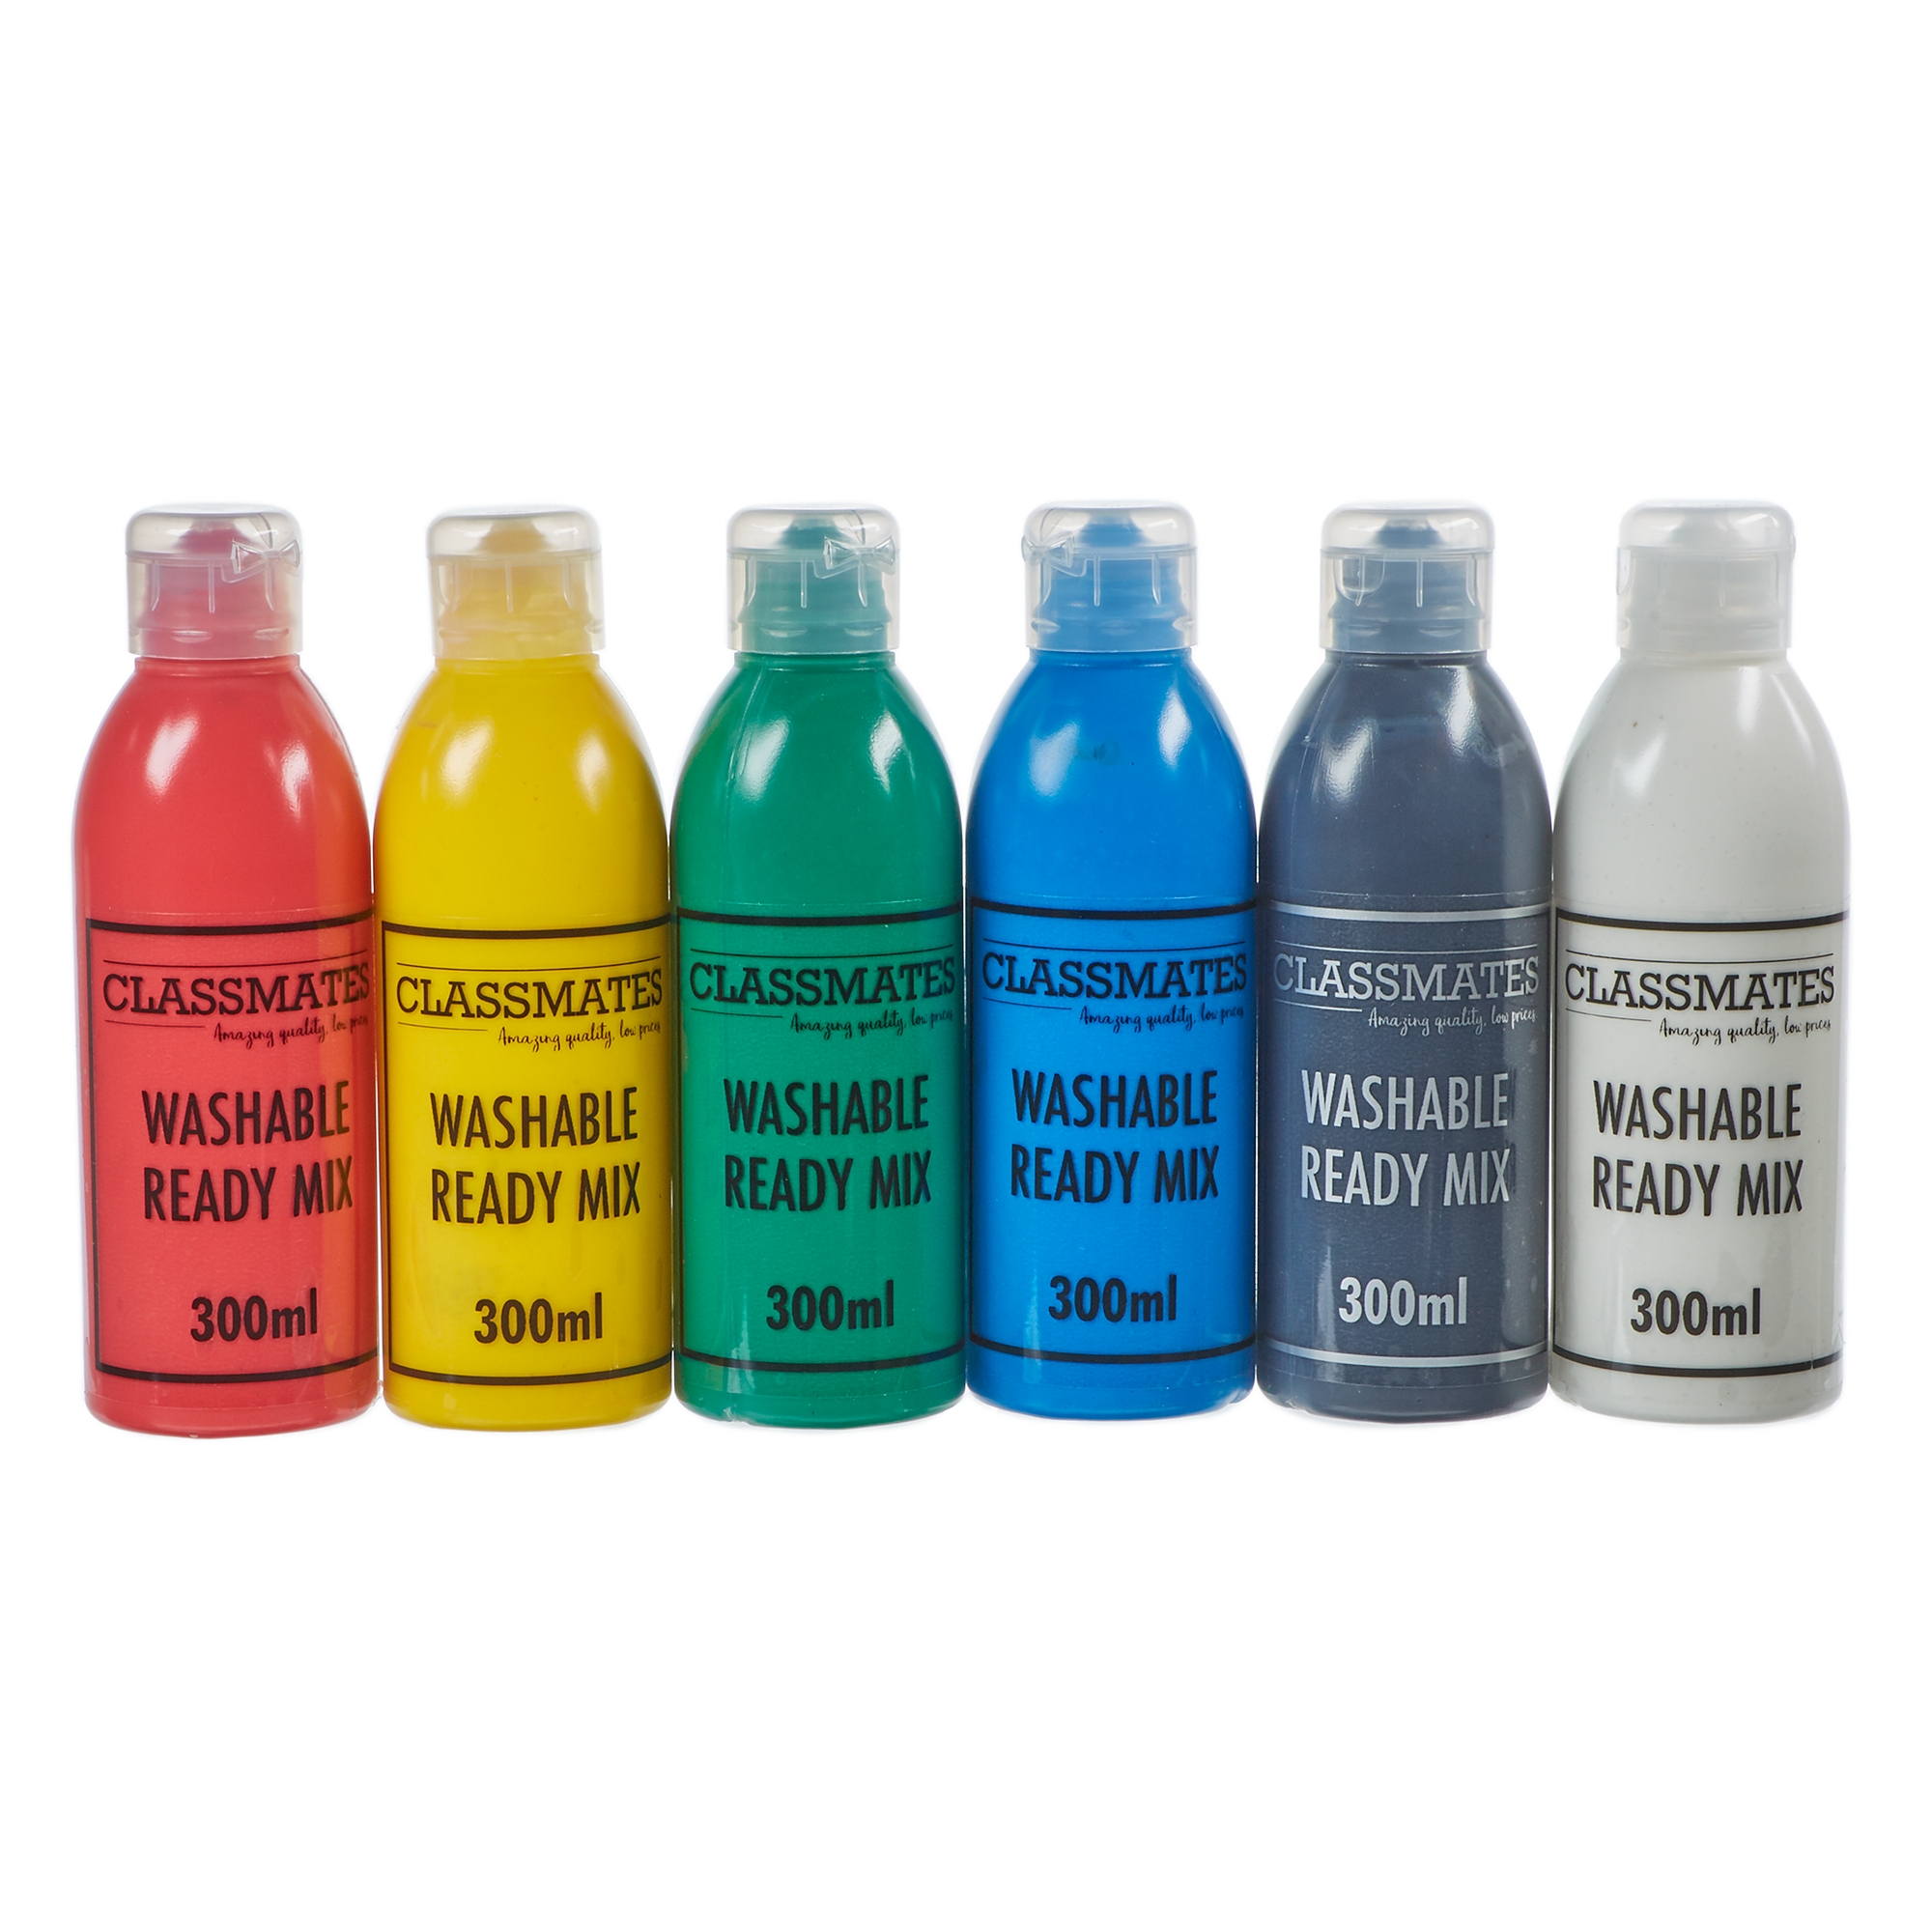 Classmates Washable Ready Mixed Paint in Assorted - Pack of 6 - 300ml Bottle